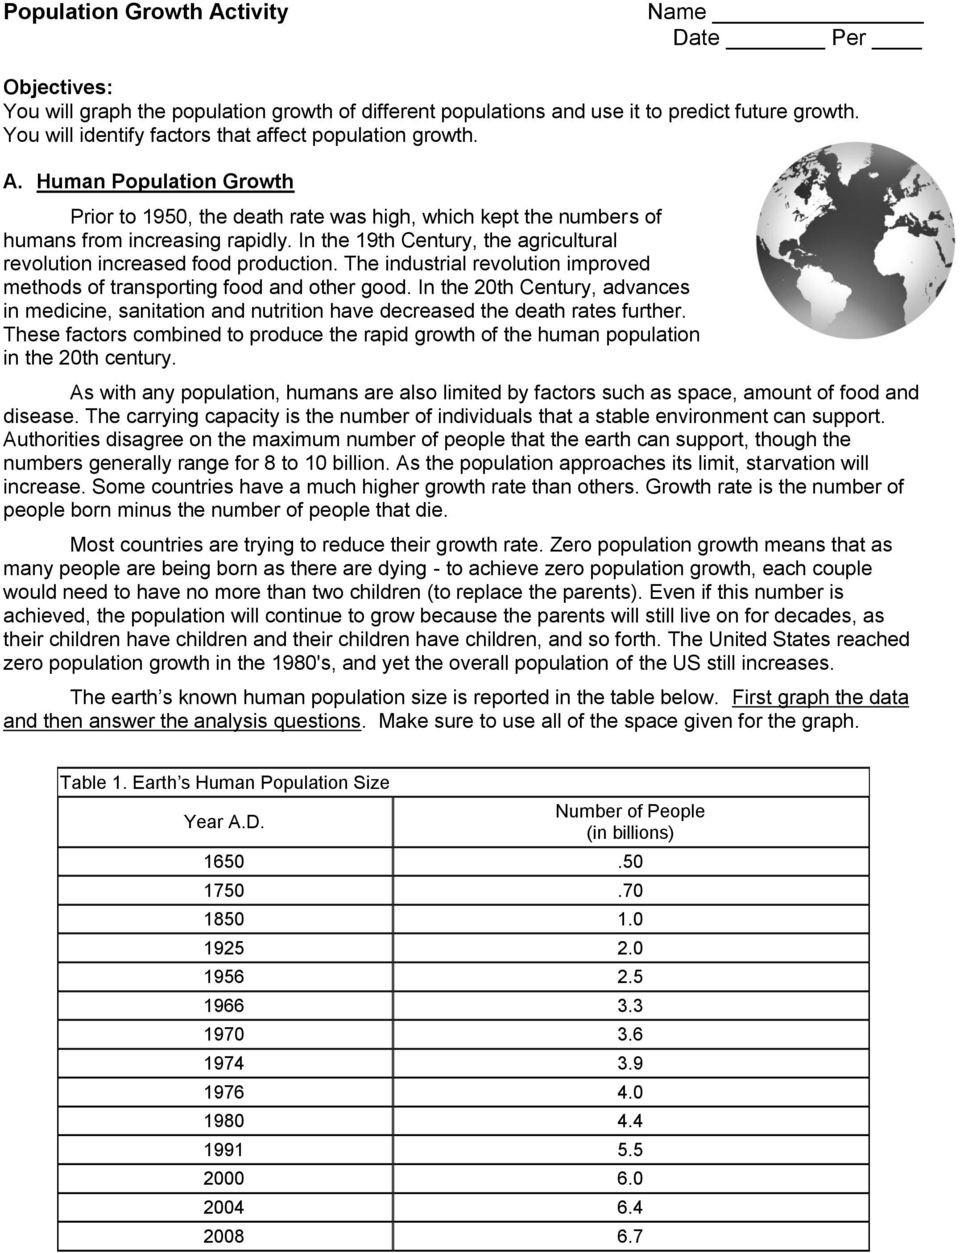 Human Population Growth Worksheet Population Growth Activity Date Per Pdf Free Download